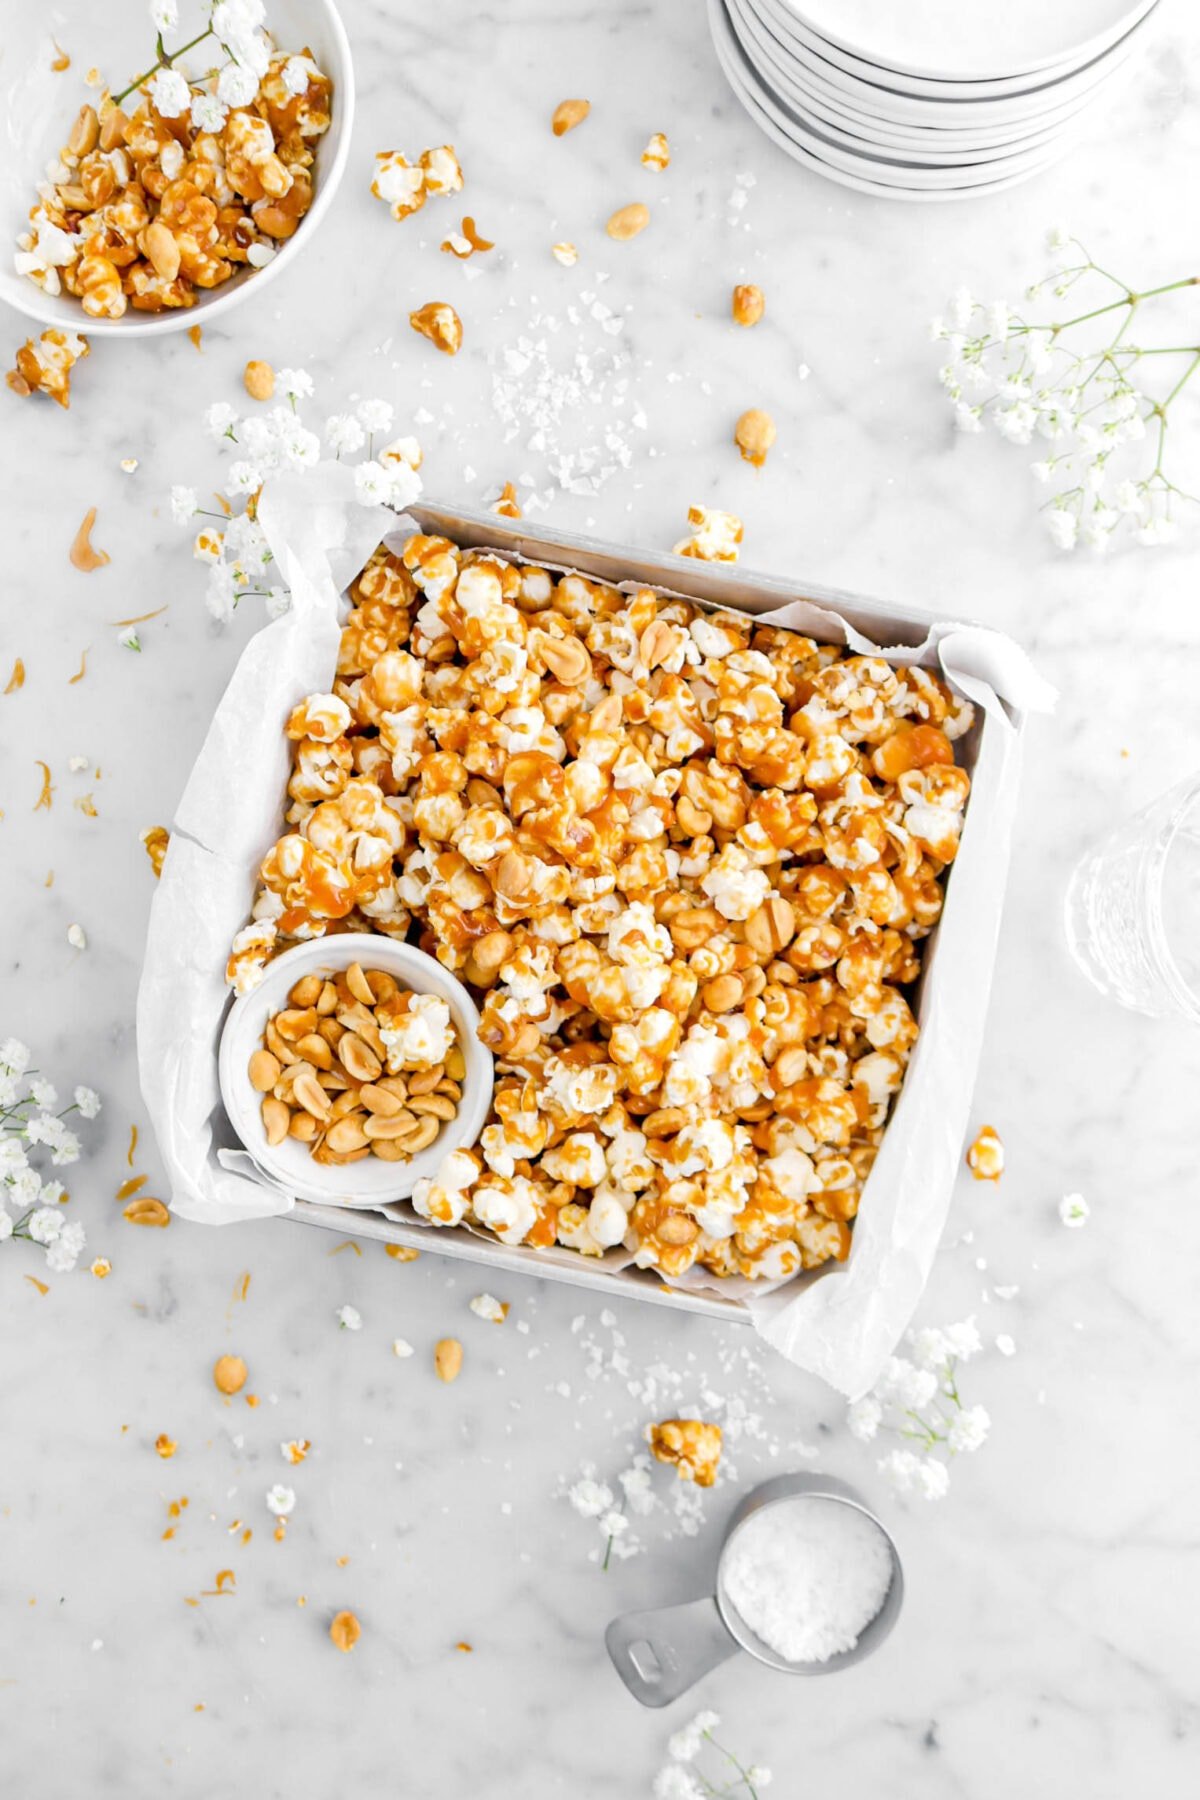 square pan filed with toffee popcorn and a small white bowl of peanuts with flowers around, a small bowl of popcorn beside, and measuring cup of flakes salt